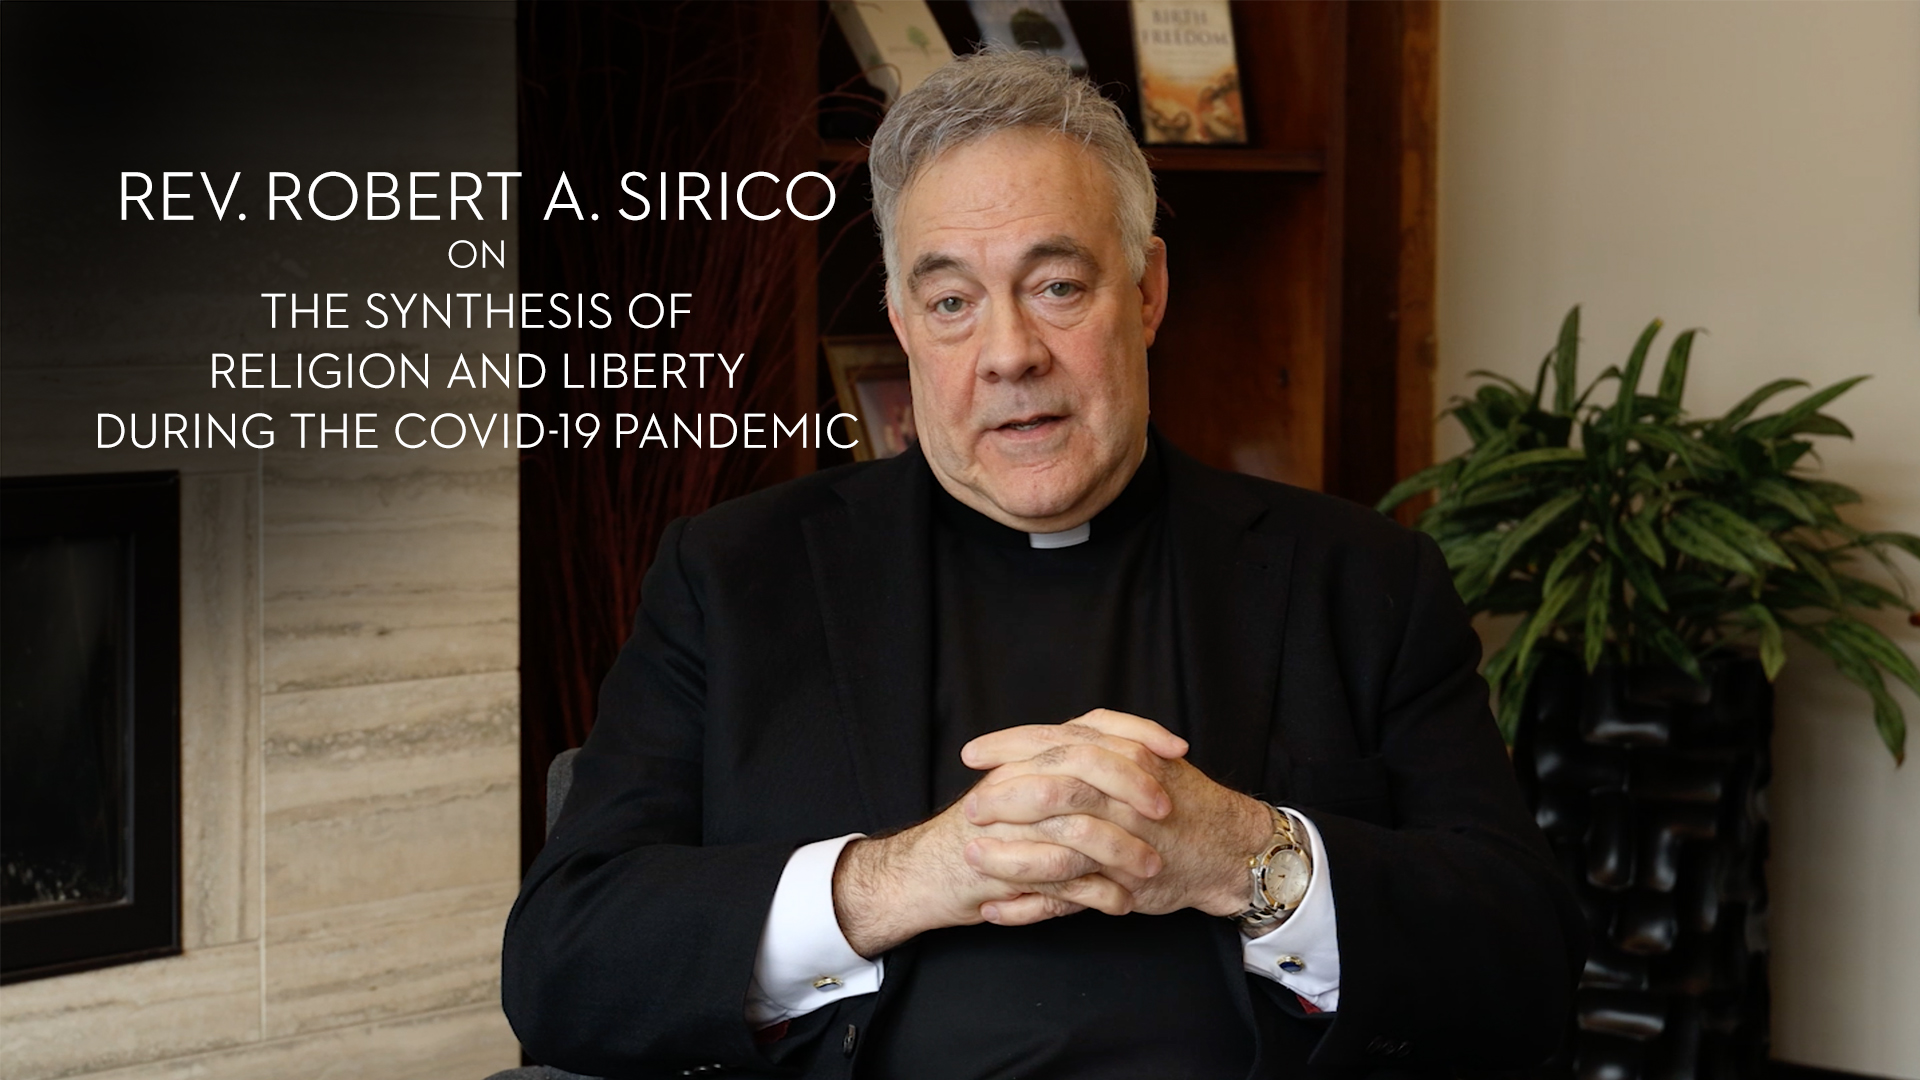 Rev. Robert Sirico on the synthesis of religion and liberty in a pandemic